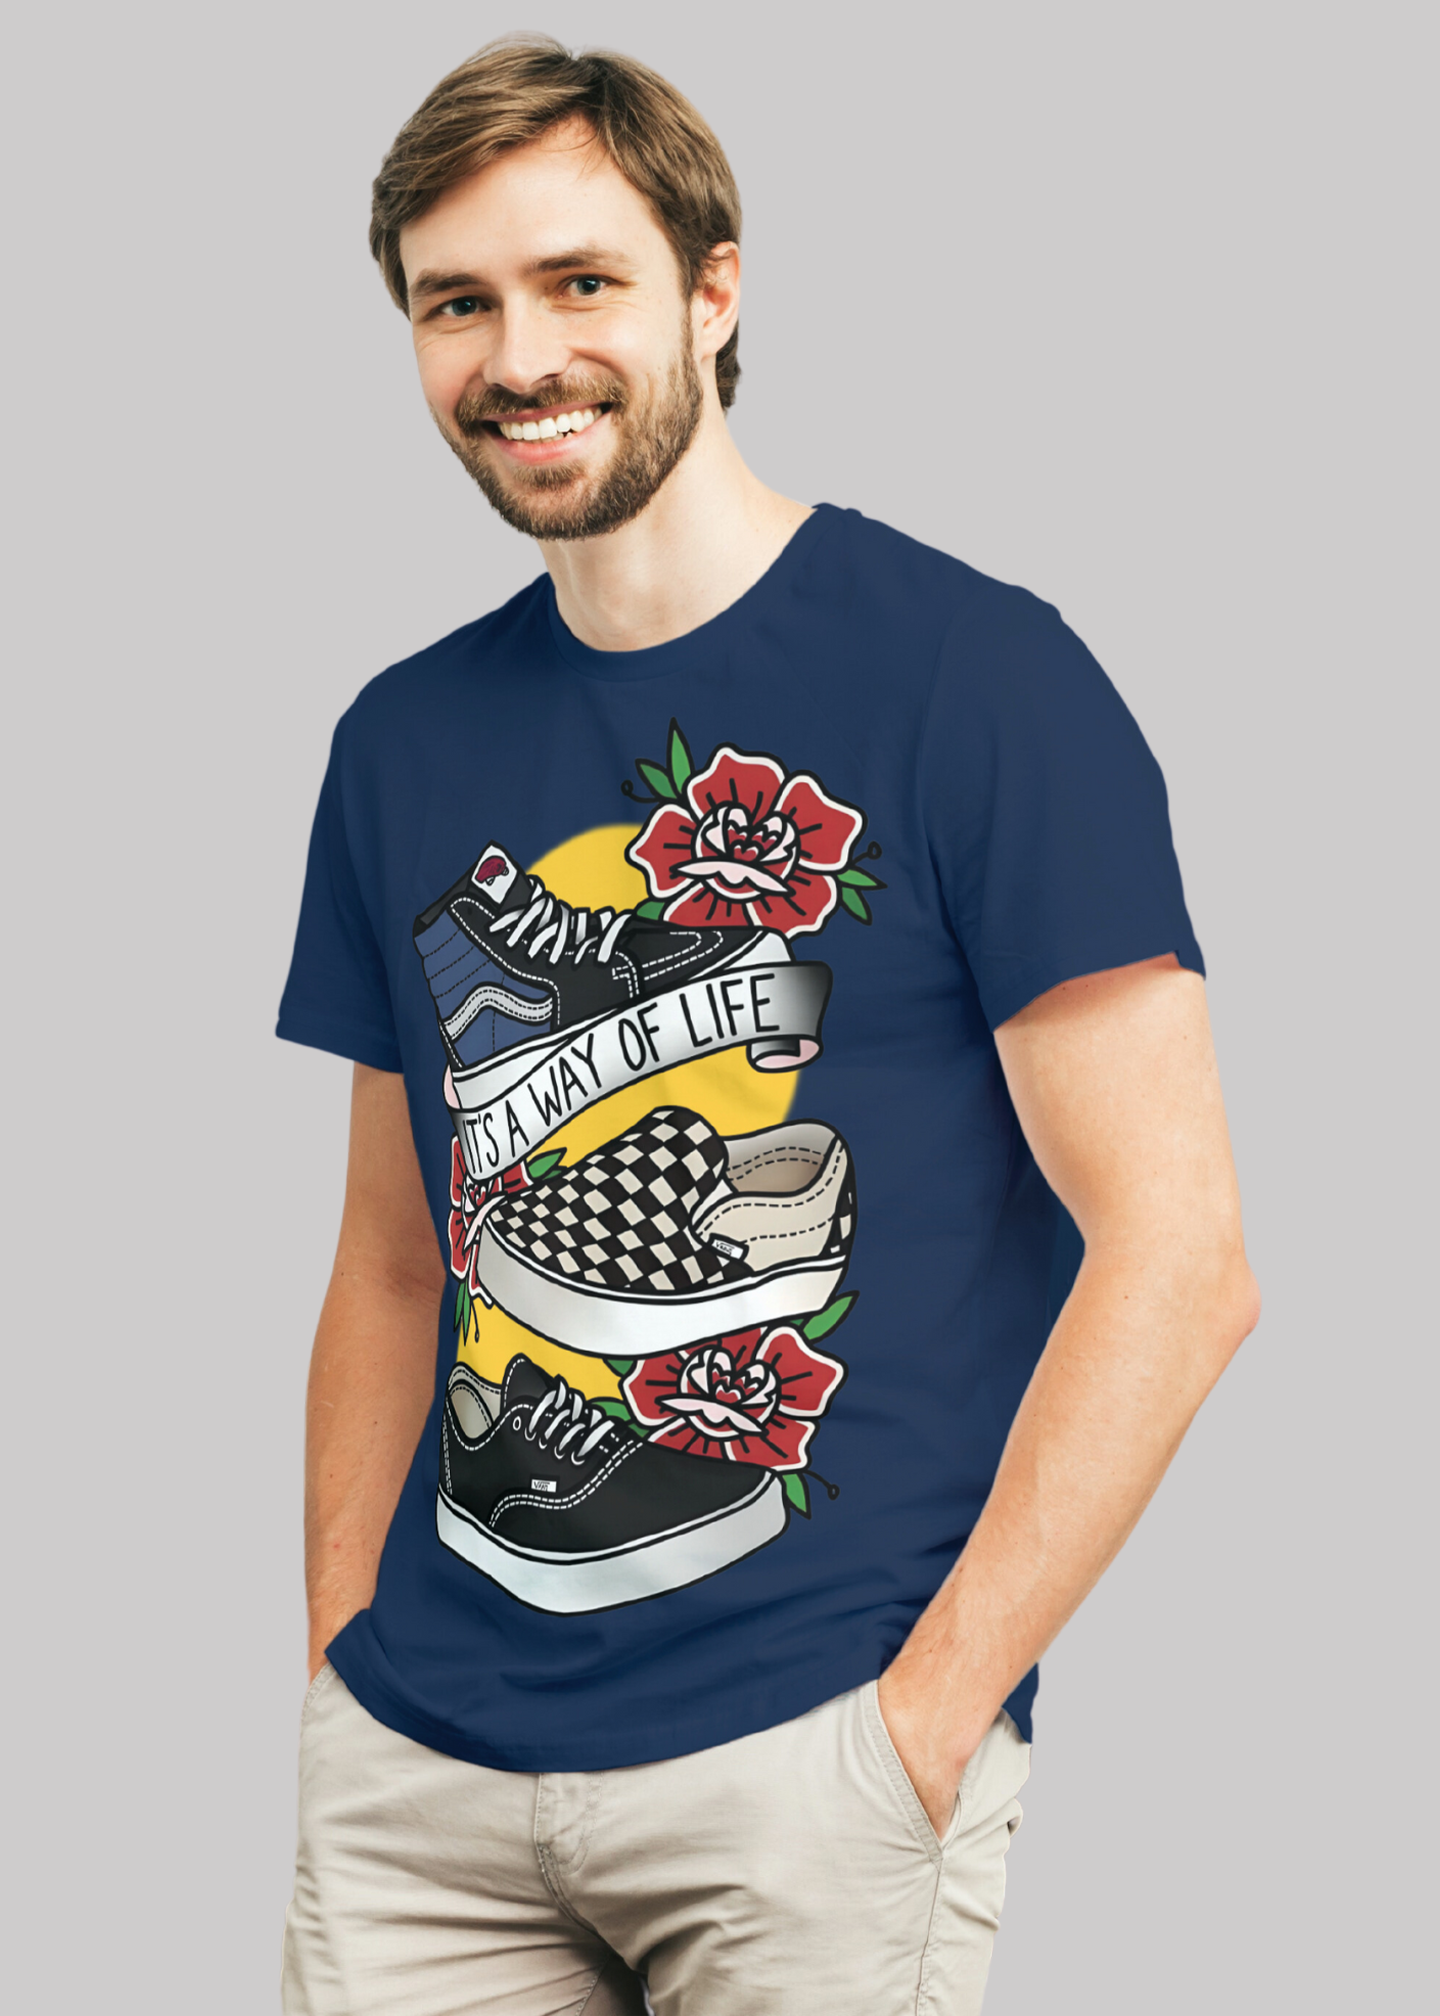 Its way of life Printed Half Sleeve Premium Cotton T-shirt For Men